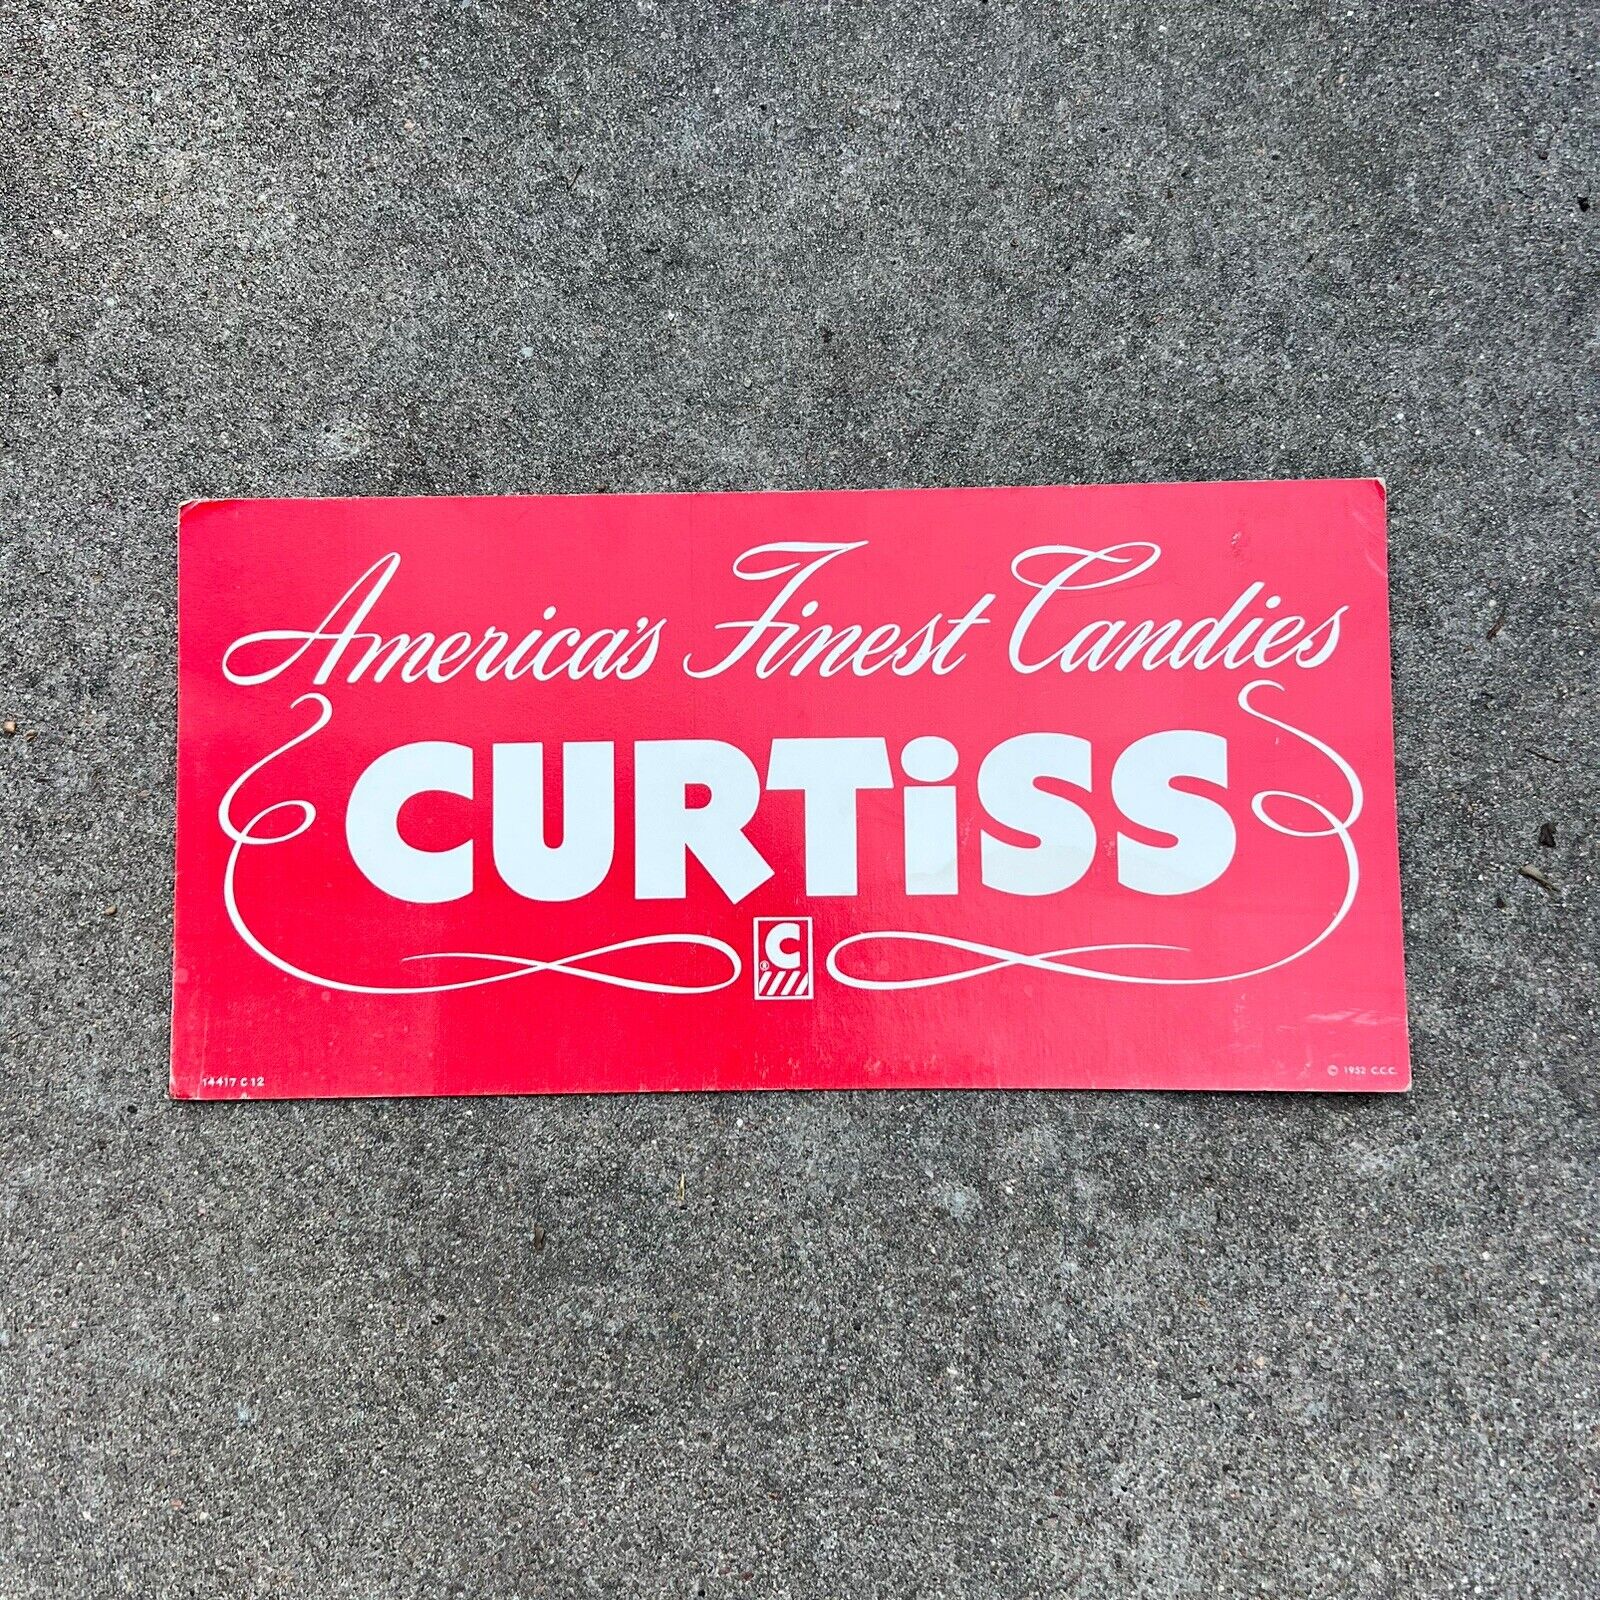 Vintage 1952 Curtiss Americans Finest Candies Red Cardboard Advertising Sign